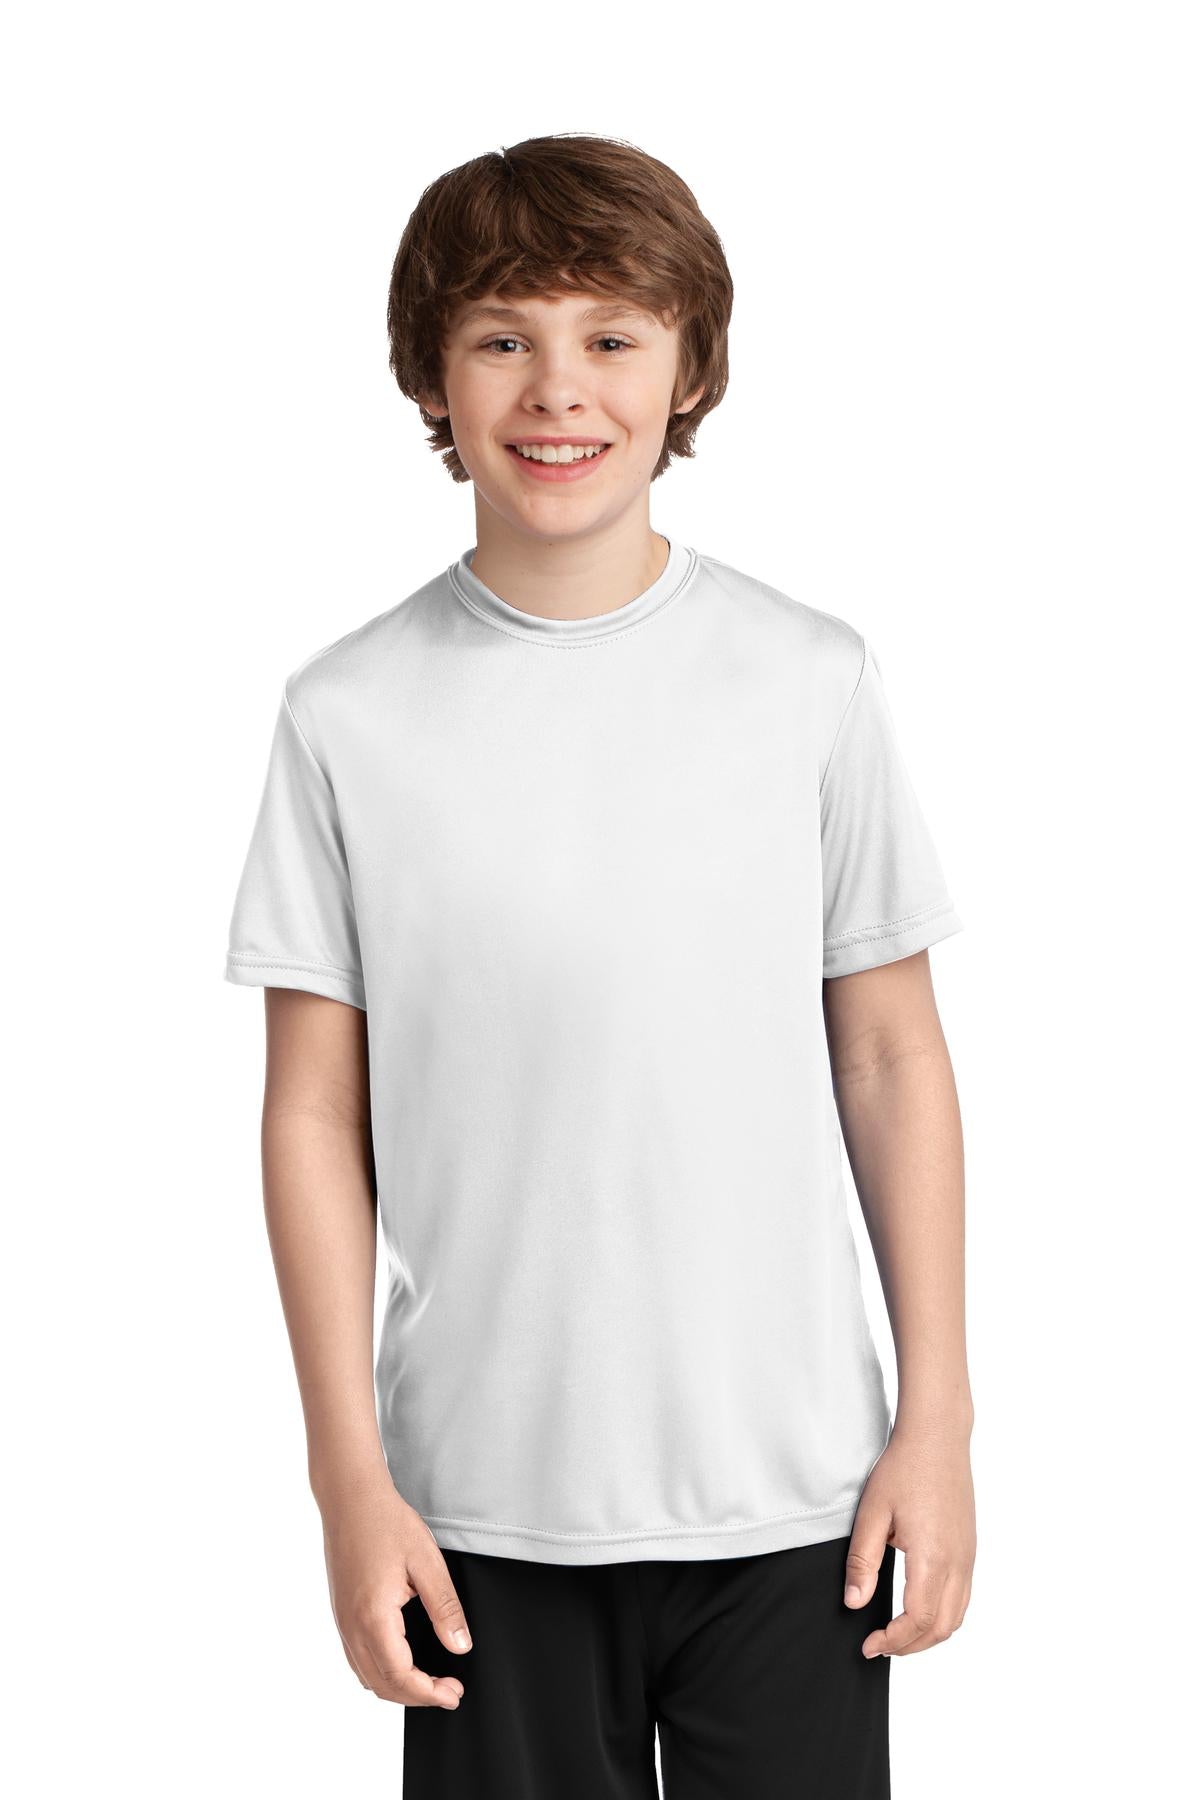 Port & Company Youth Performance Tee. PC380Y